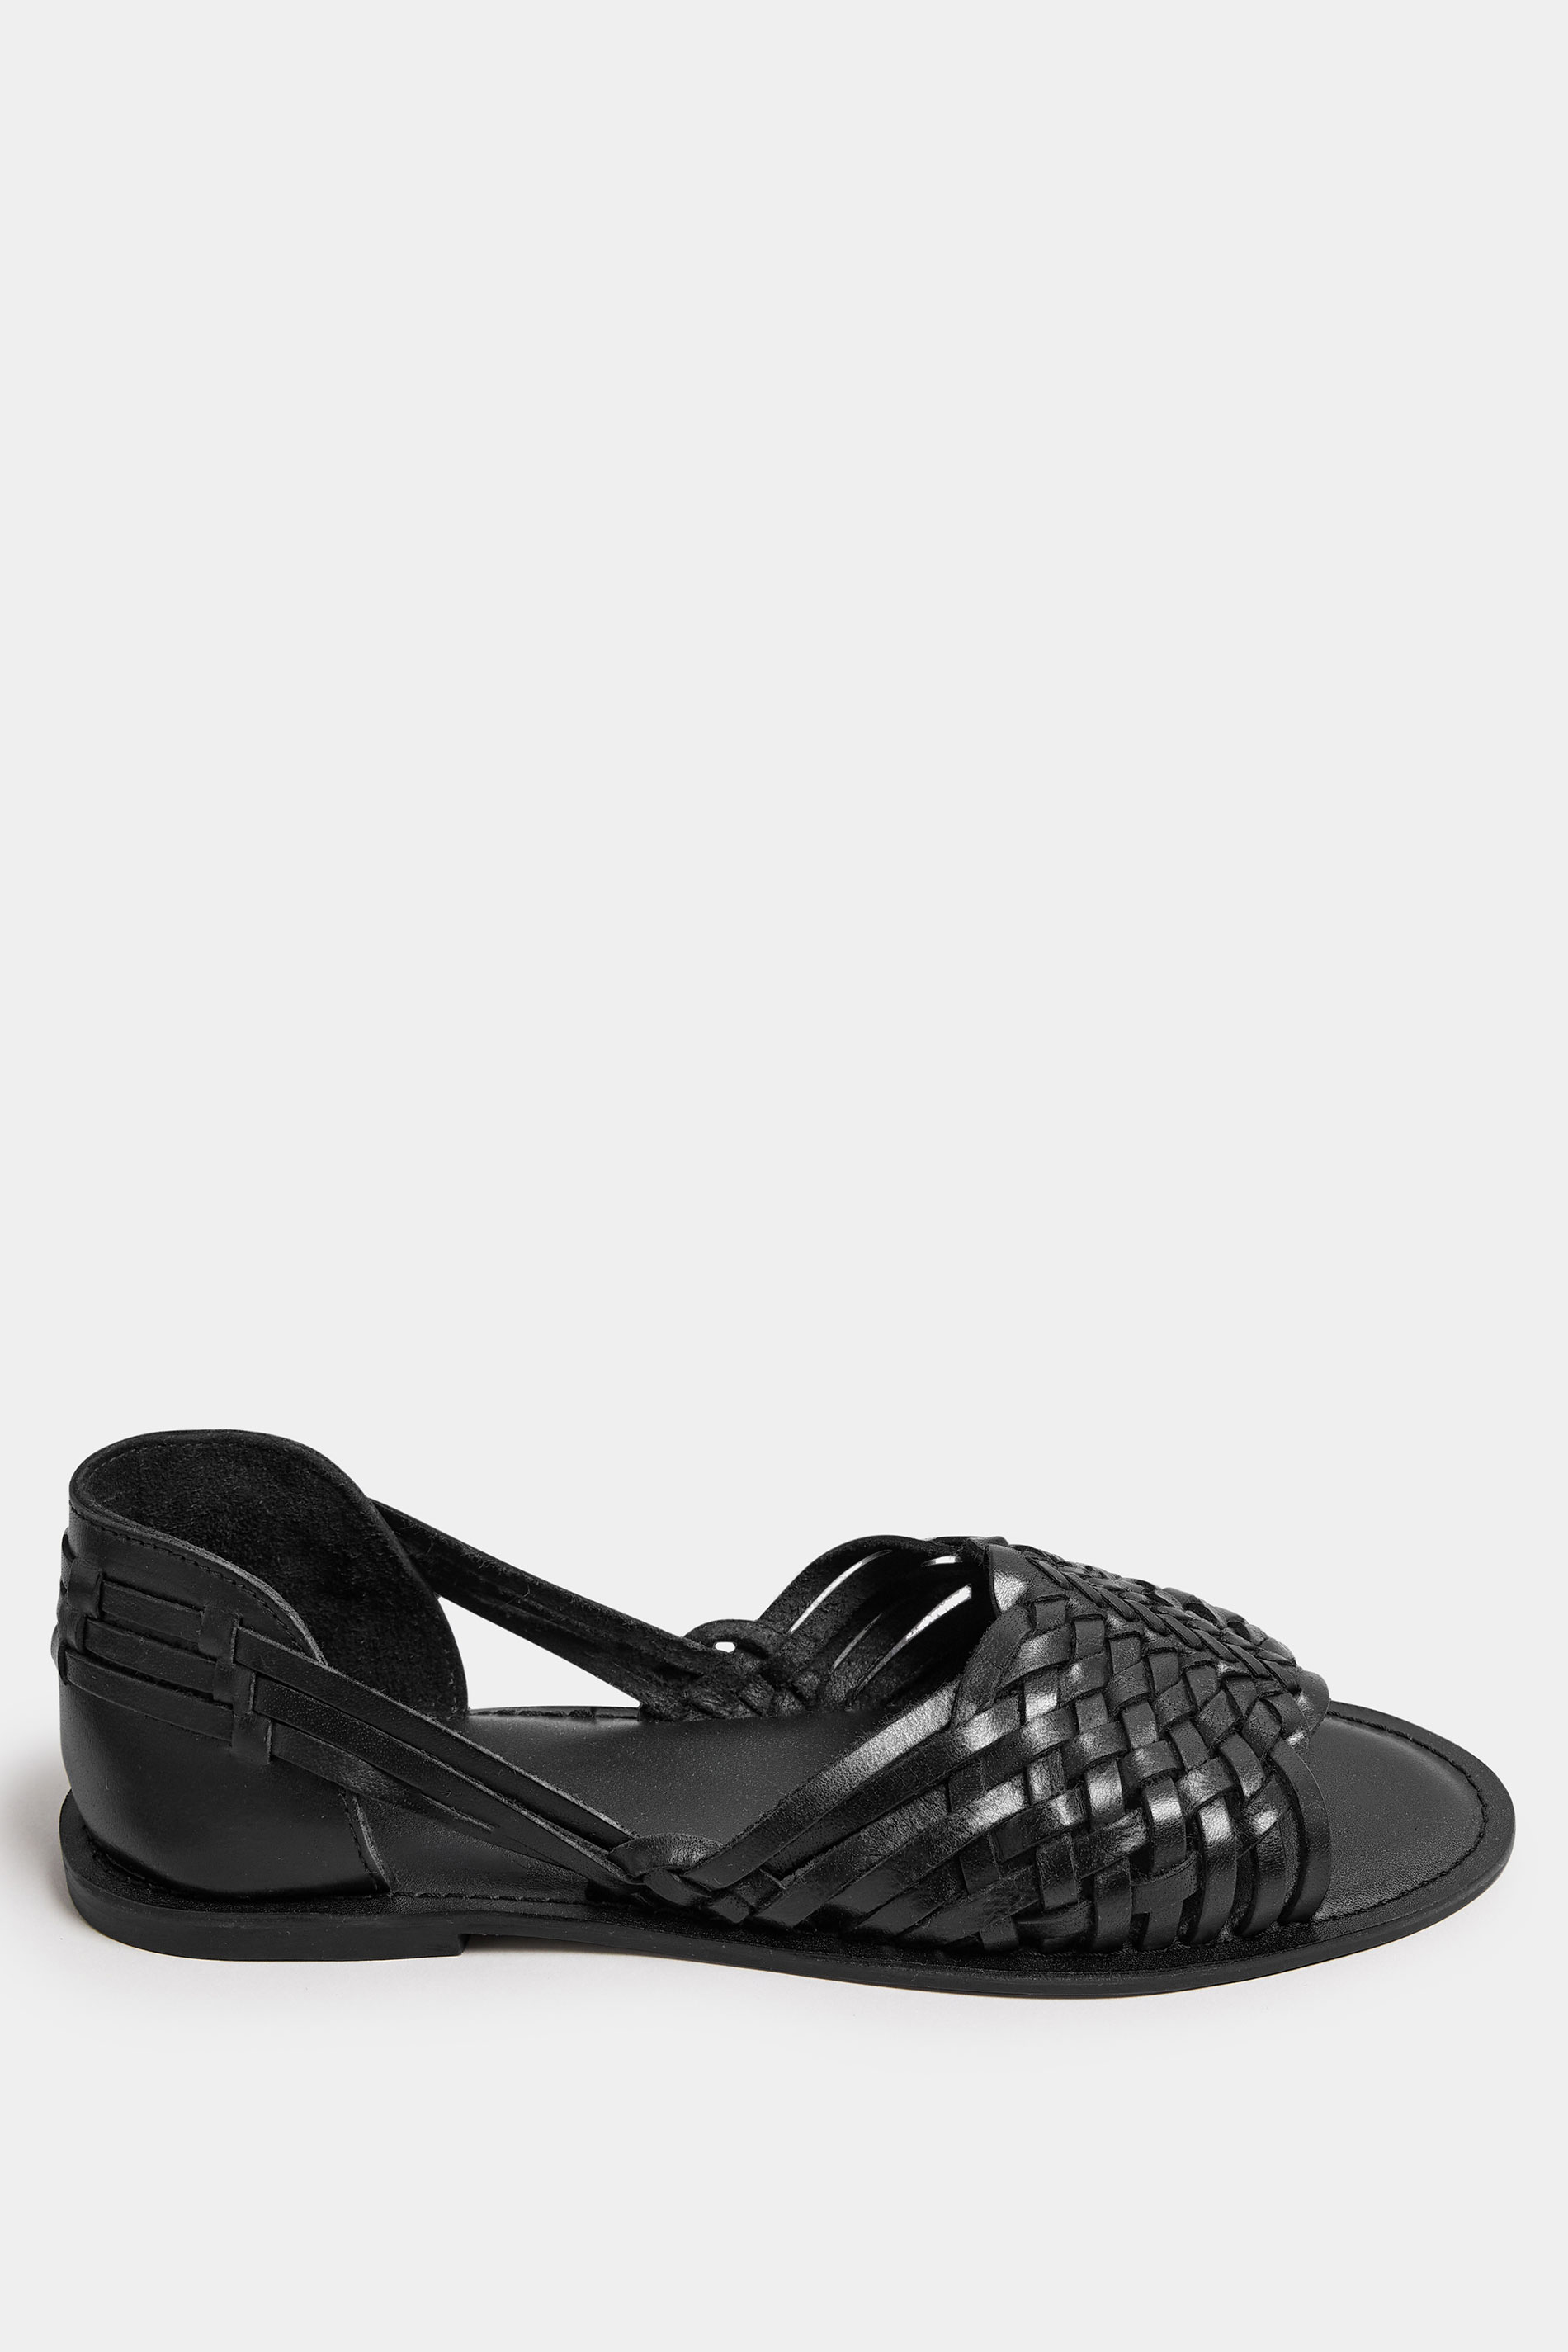 Black Woven Leather Mules In Extra Wide EEE Fit | Yours Clothing 3